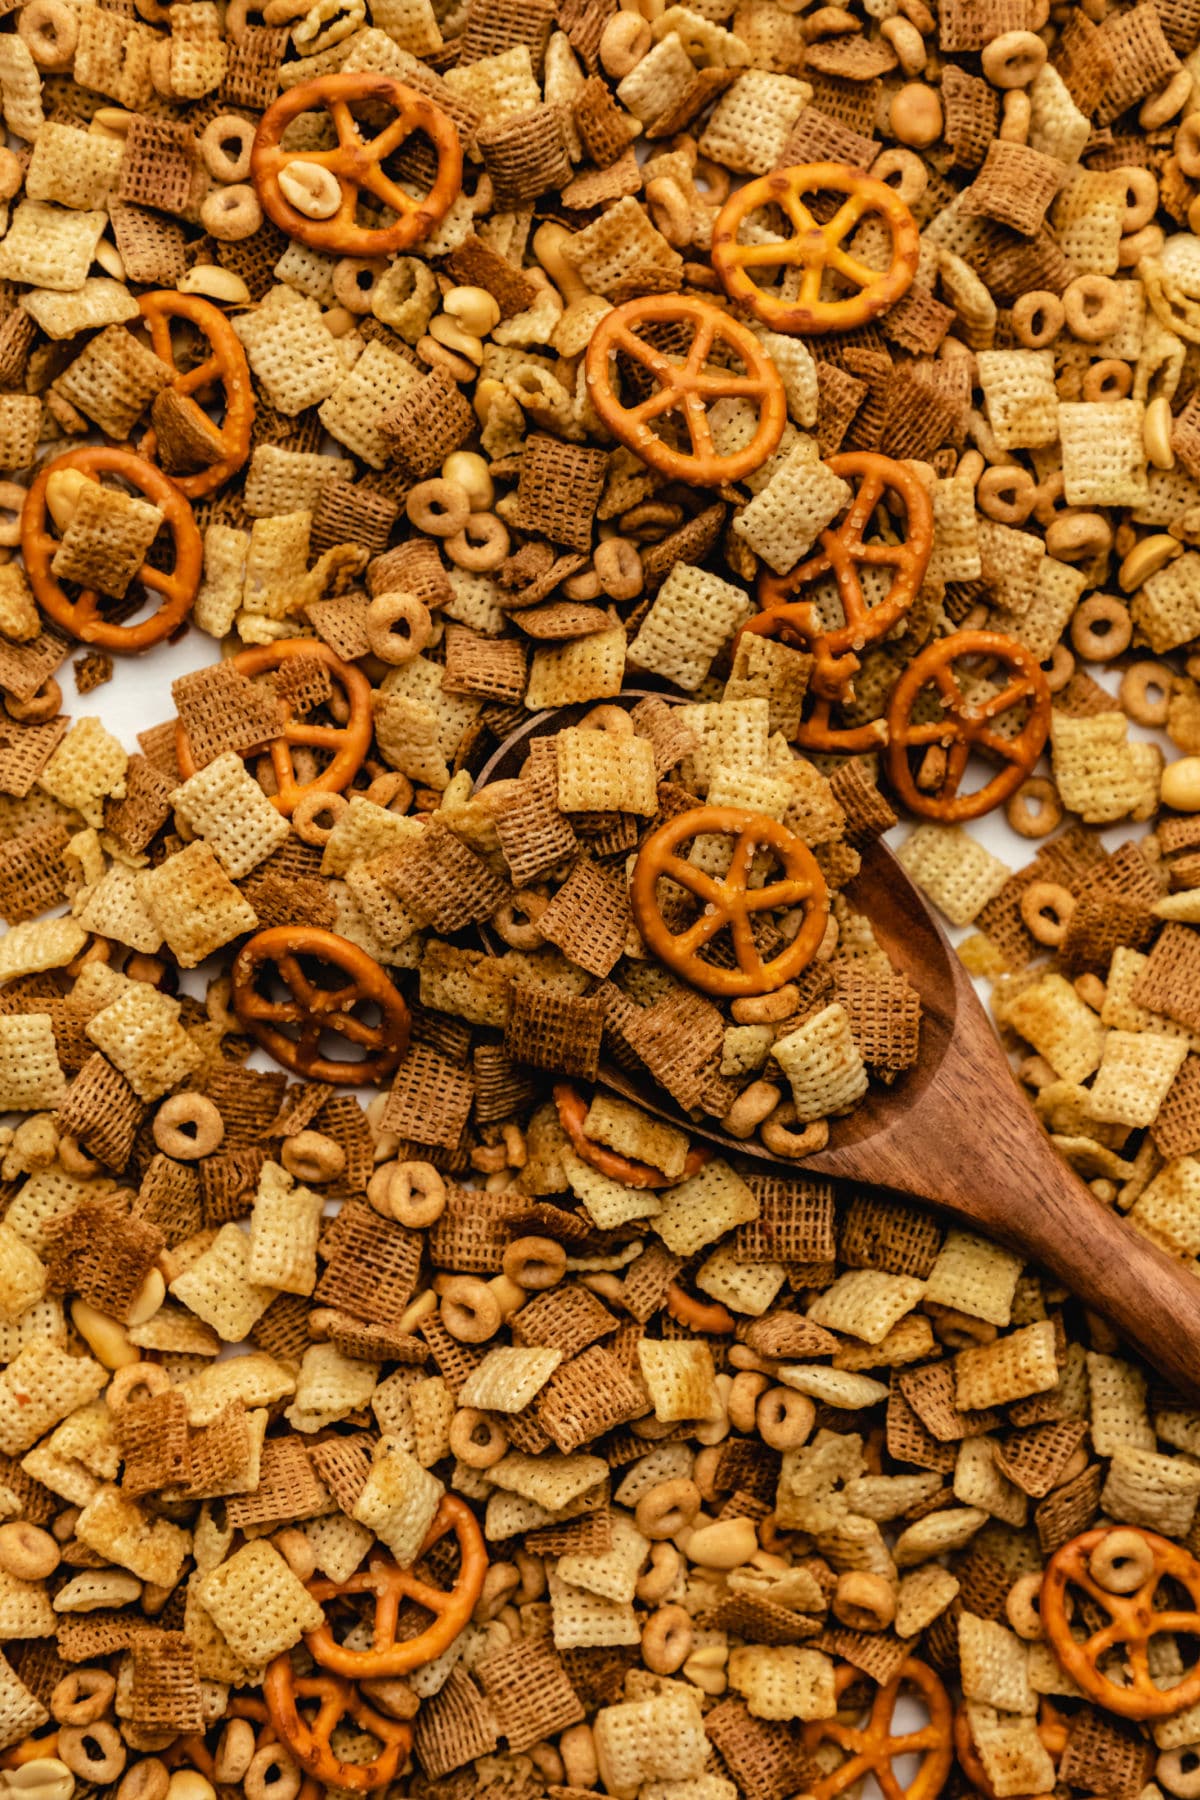 A wooden spoon scooping up slow cooker Chex mix from a baking tray.